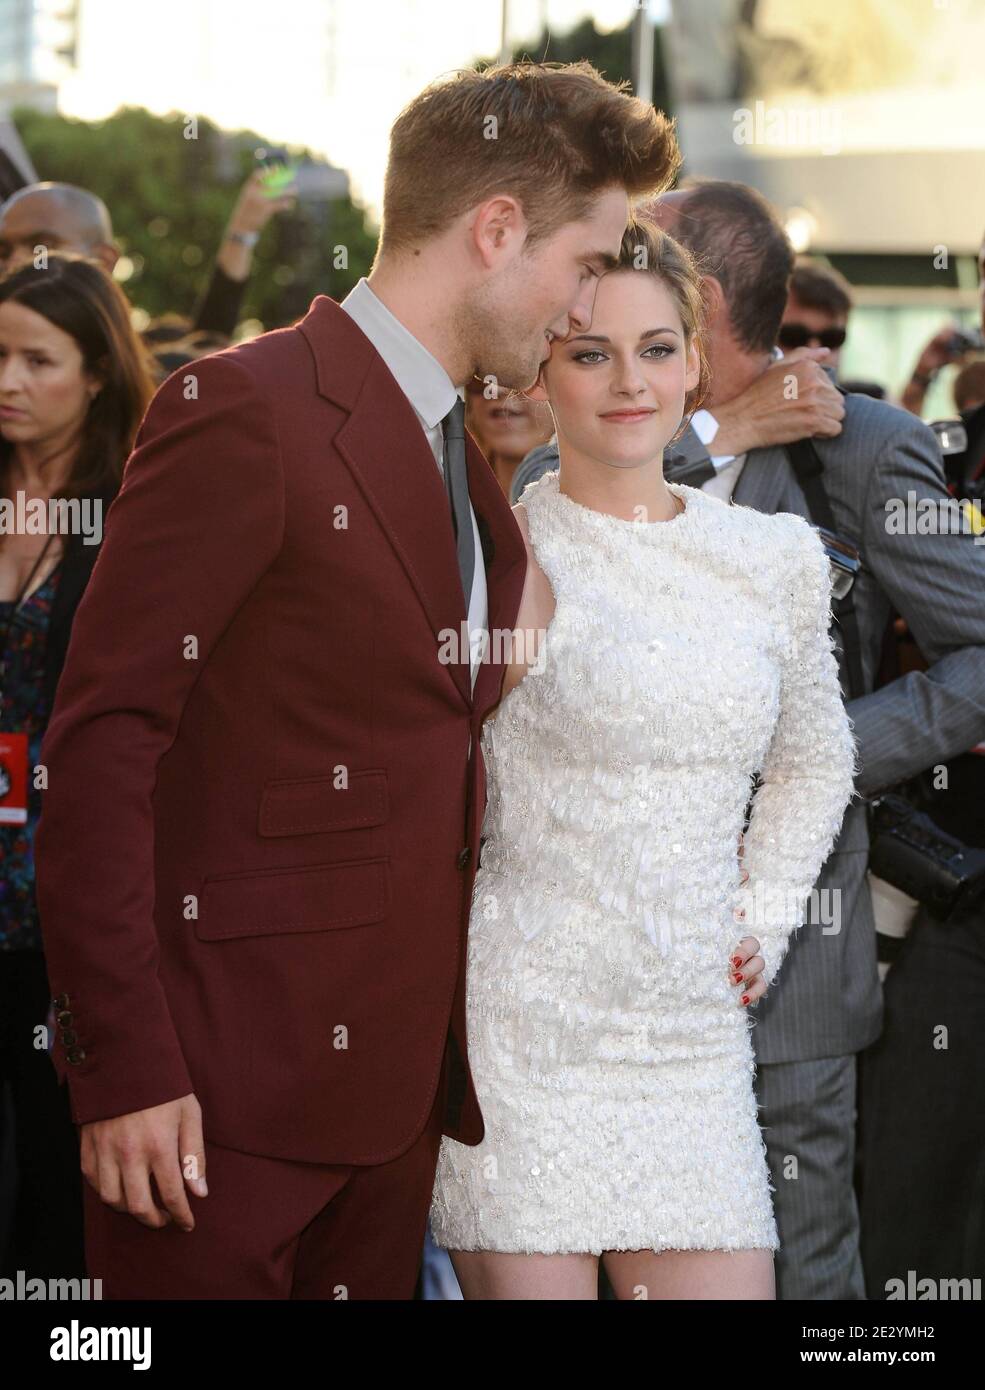 'Robert Pattinson and Kristen Stewart attend the premiere of ''The Twilight Saga: Eclipse'' part of the 2010 Los Angeles Film Festival. Los Angeles, June 24, 2010. (Pictured : Robert Pattinson, Kristen Stewart). Photo by Lionel Hahn/ABACAPRESS.COM' Stock Photo